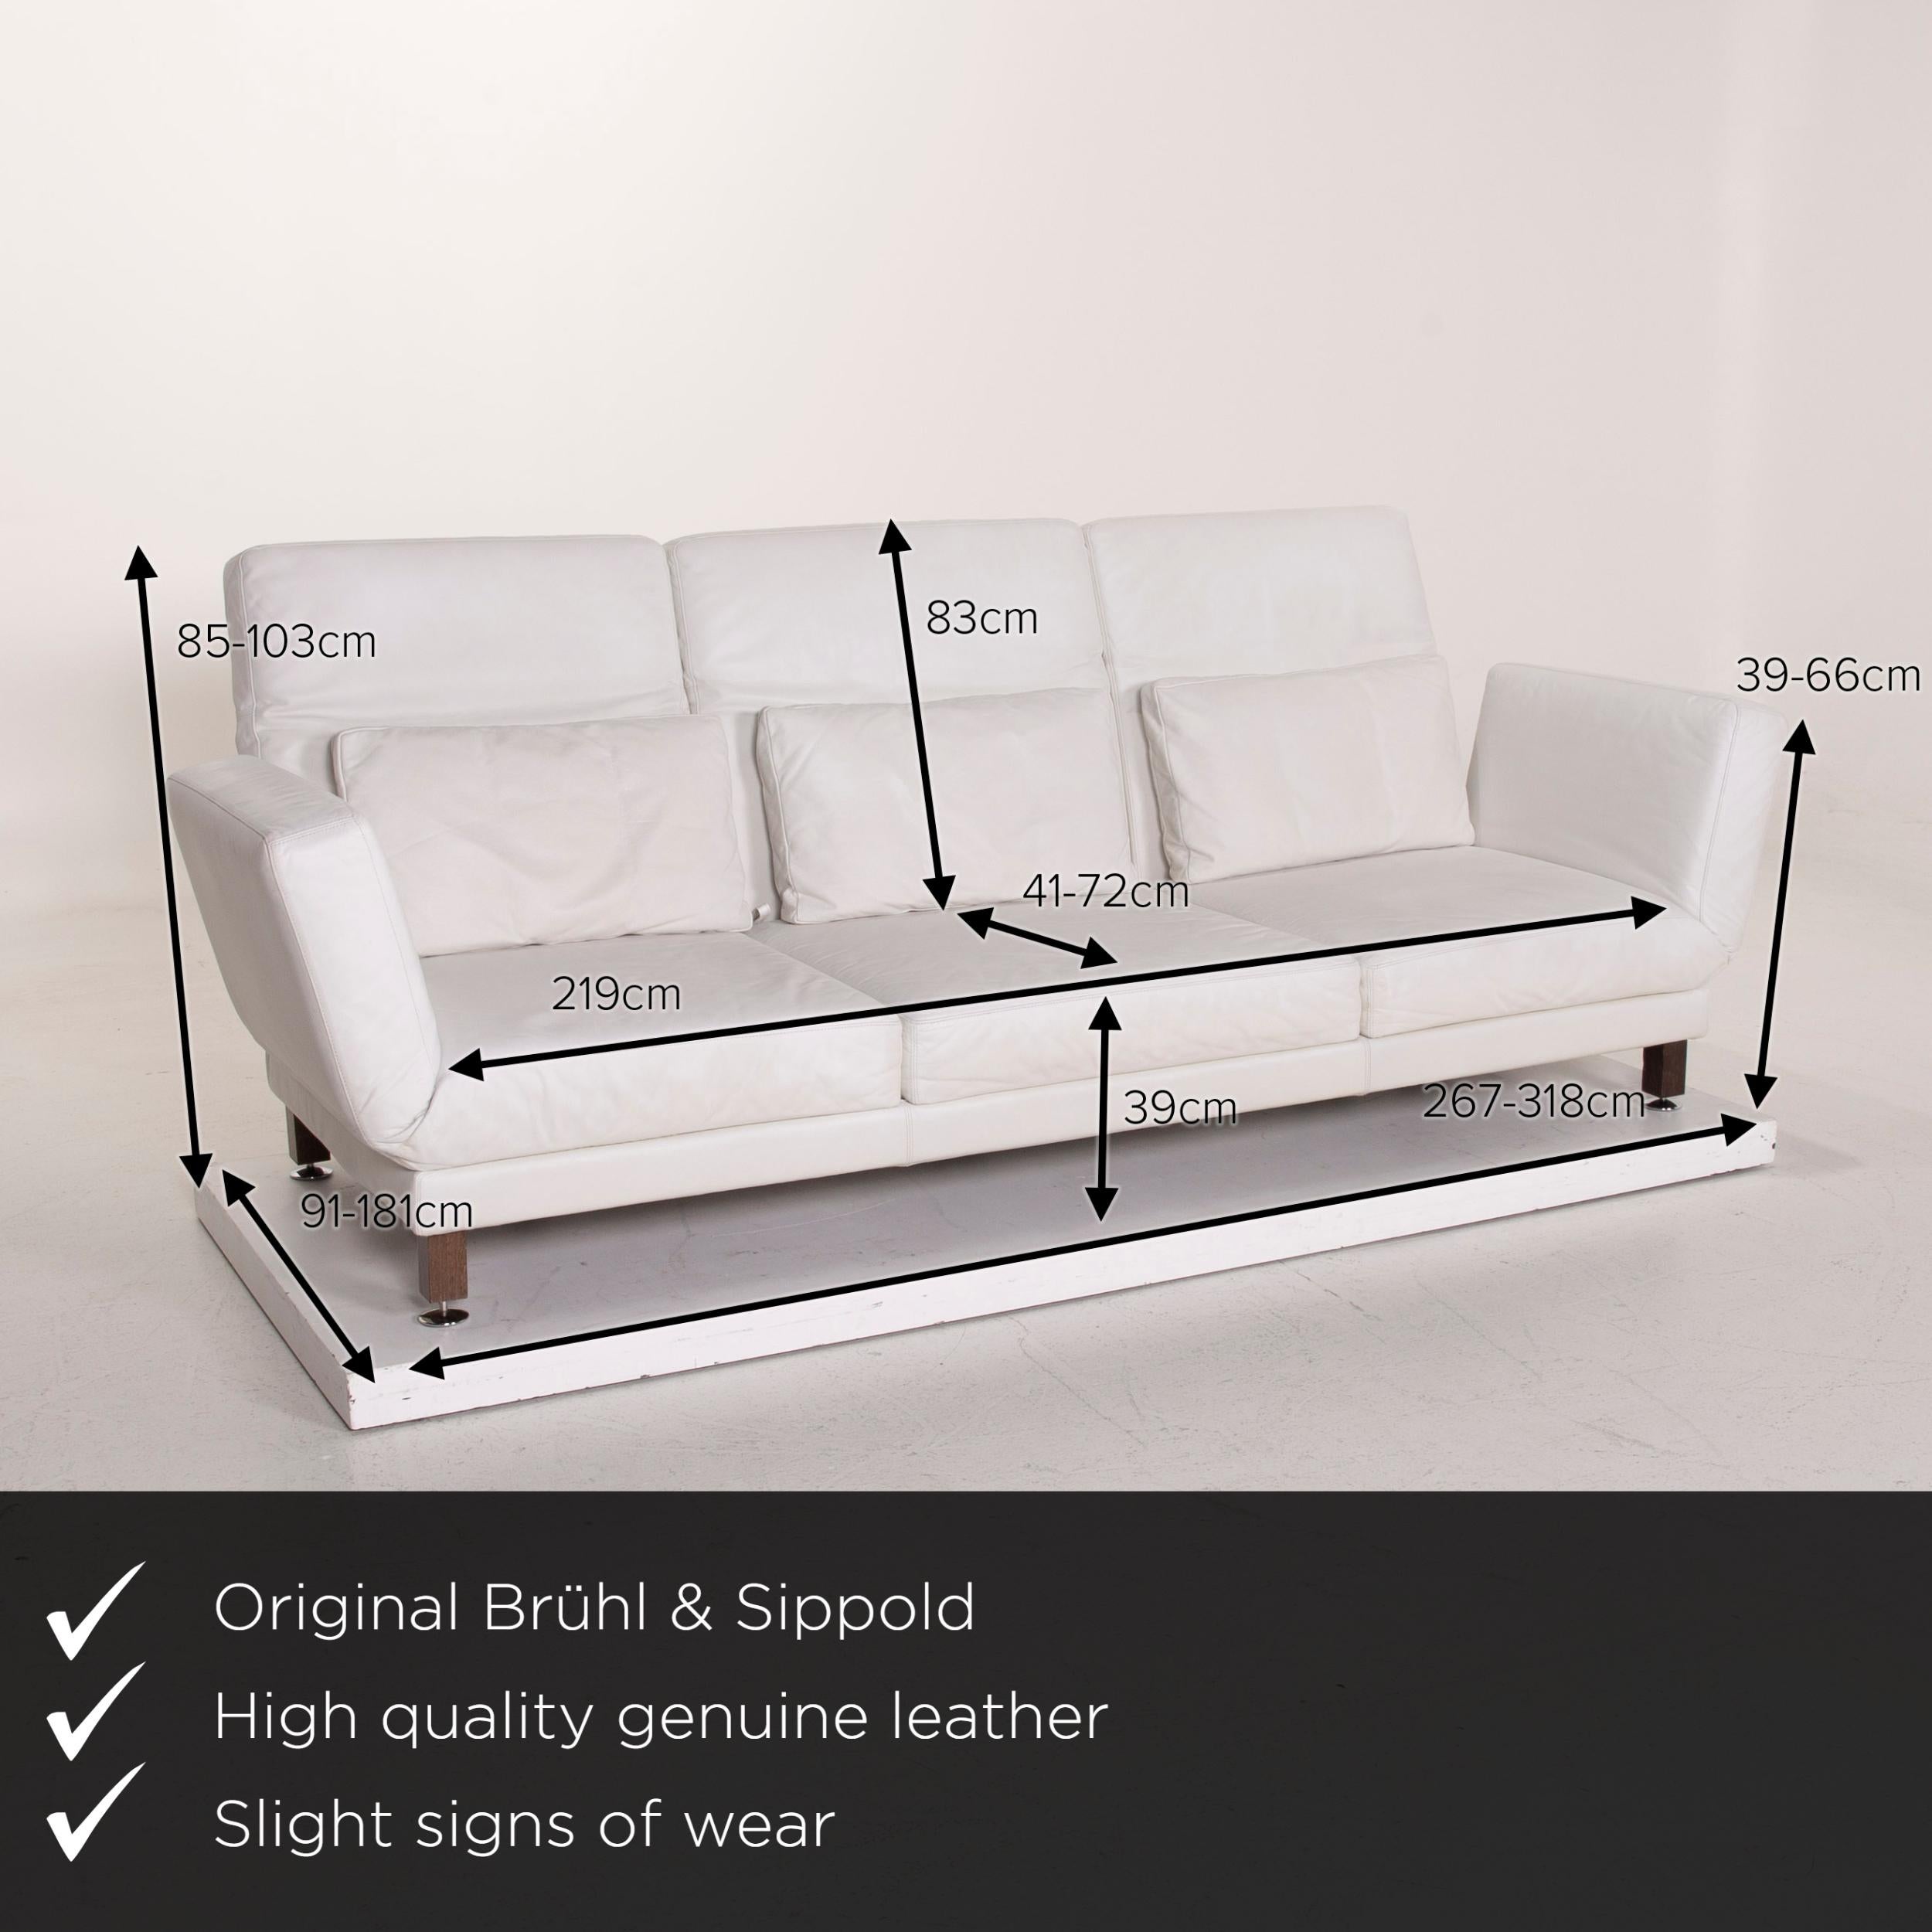 We present to you a Brühl & Sippold Moule leather sofa set white three-seat relax function stool.

 

 Product measurements in centimeters:
 

Depth 91
Width 267
Height 103
Seat height 39
Rest height 39
Seat depth 41
Seat width